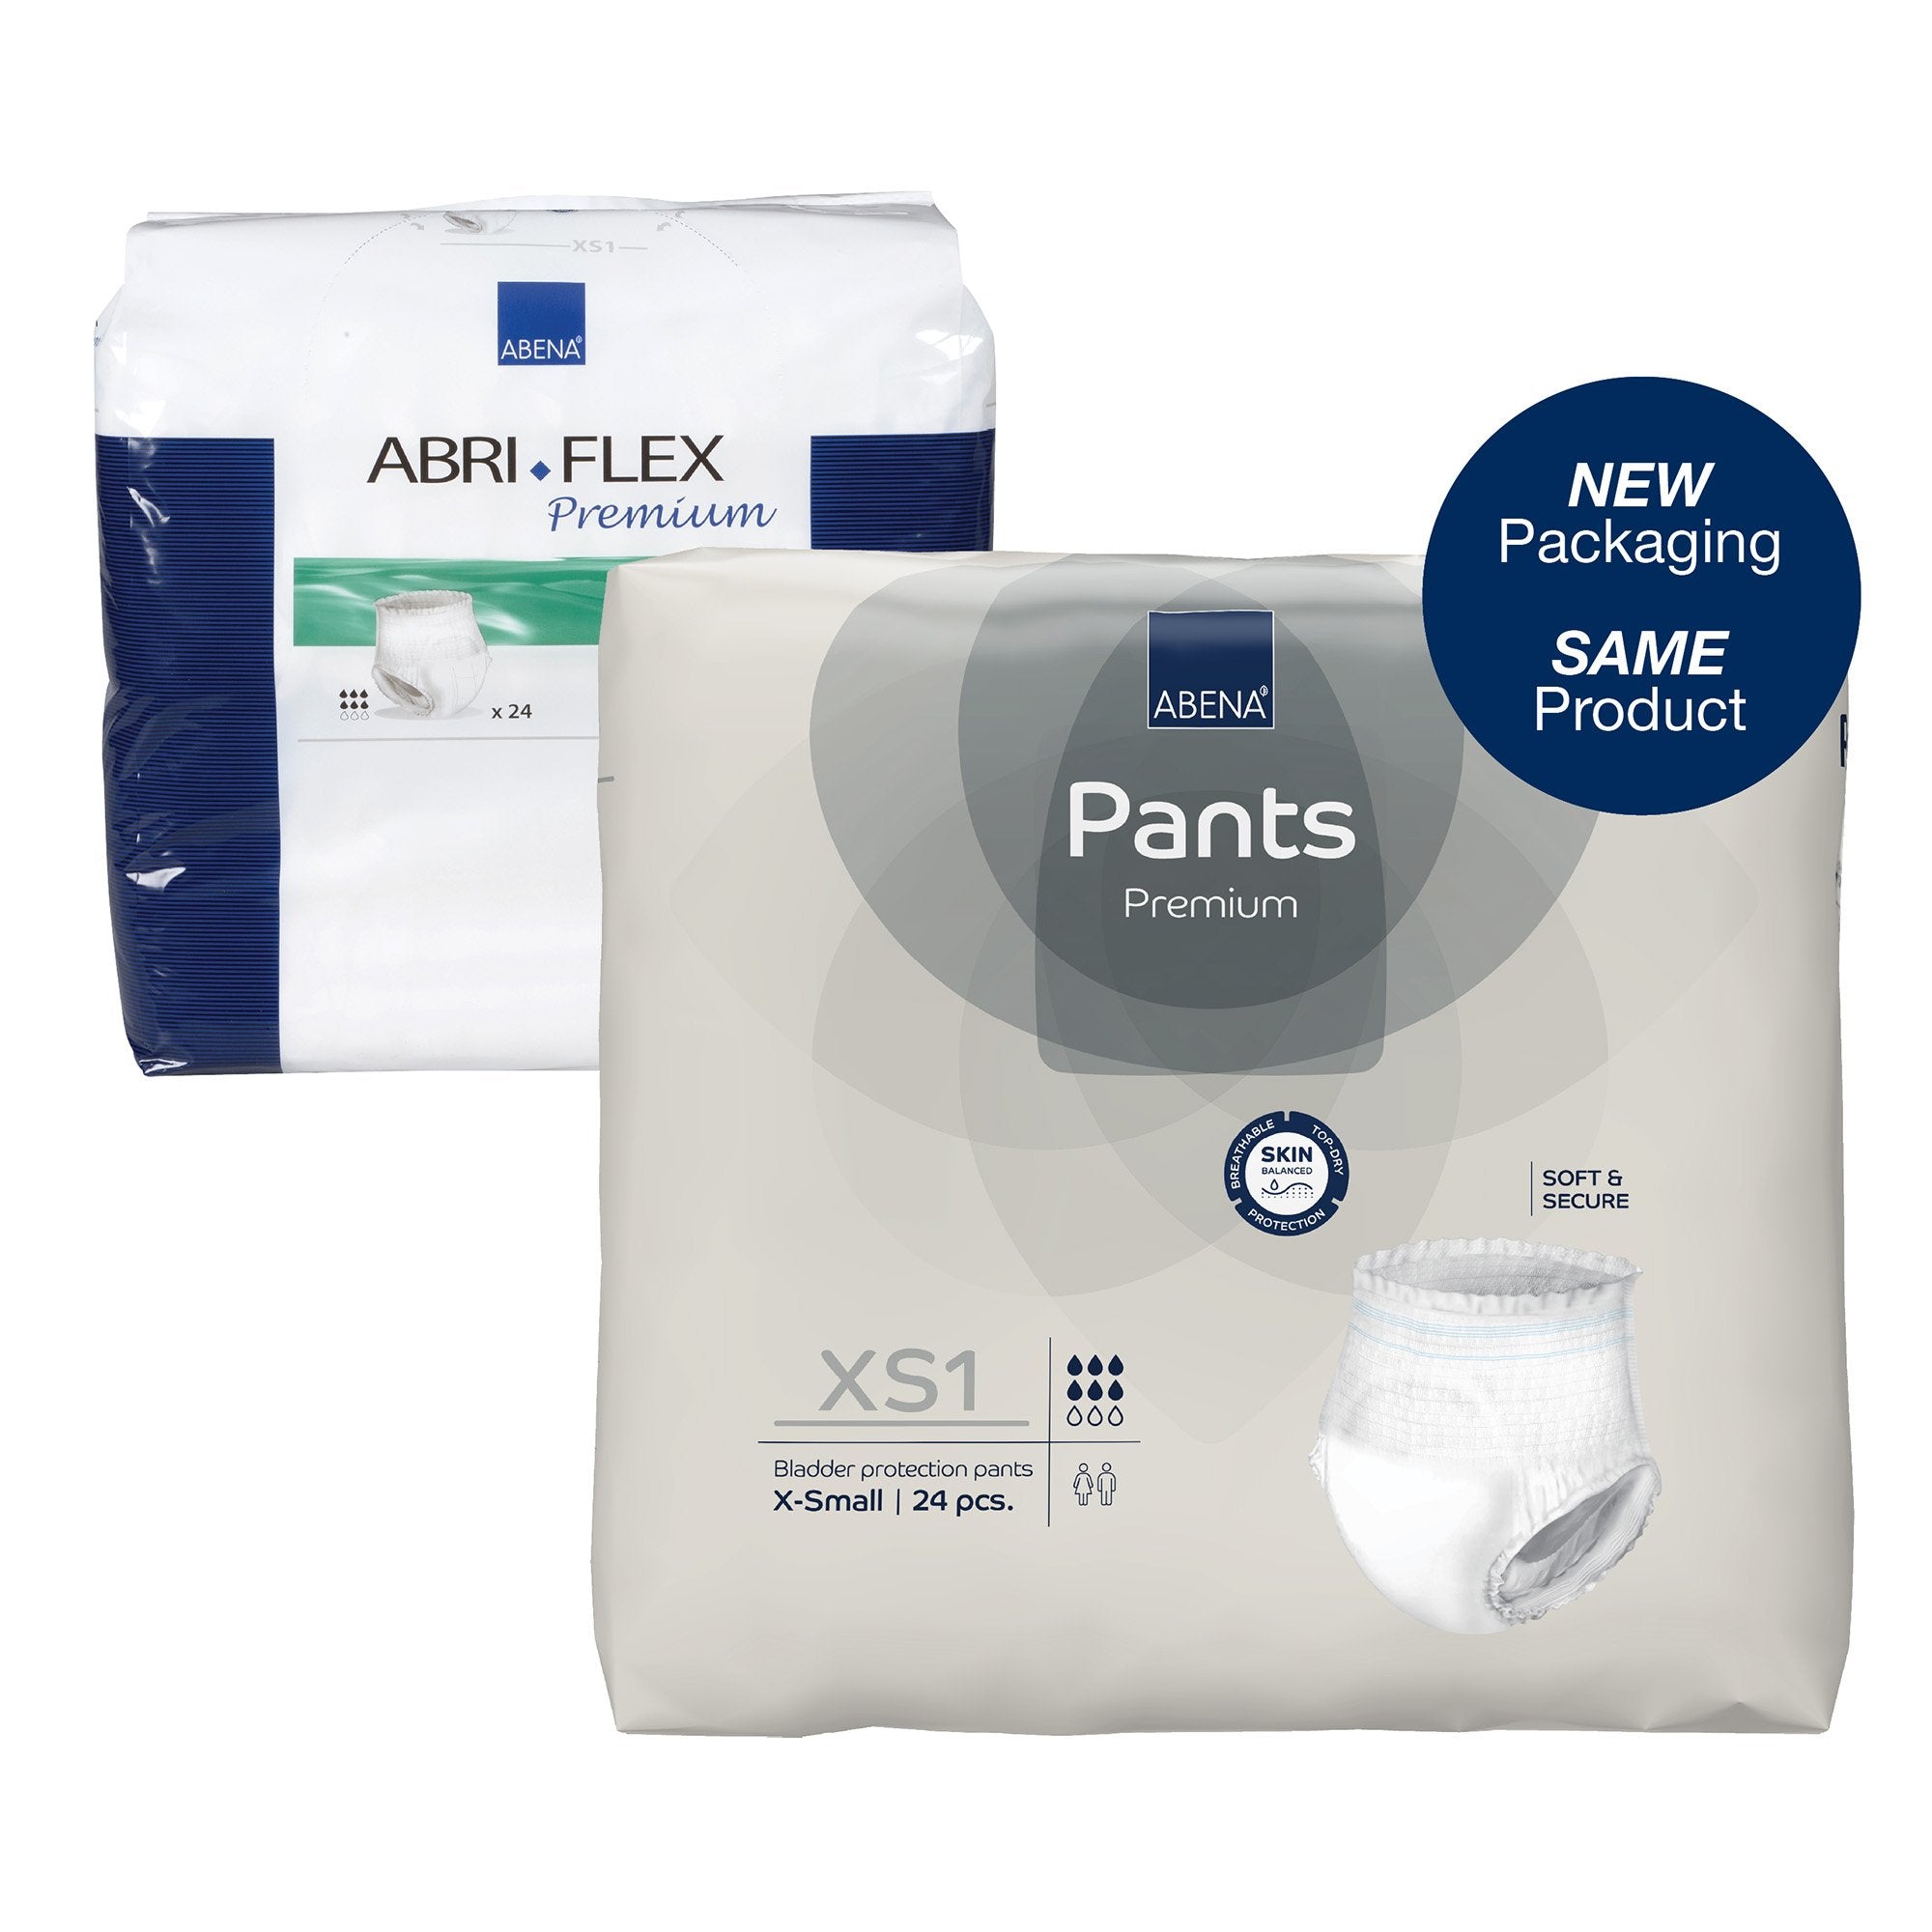 Unisex Adult Absorbent Underwear Abena® Premium Pants XS1 Pull On with Tear Away Seams X-Small Disposable Moderate Absorbency